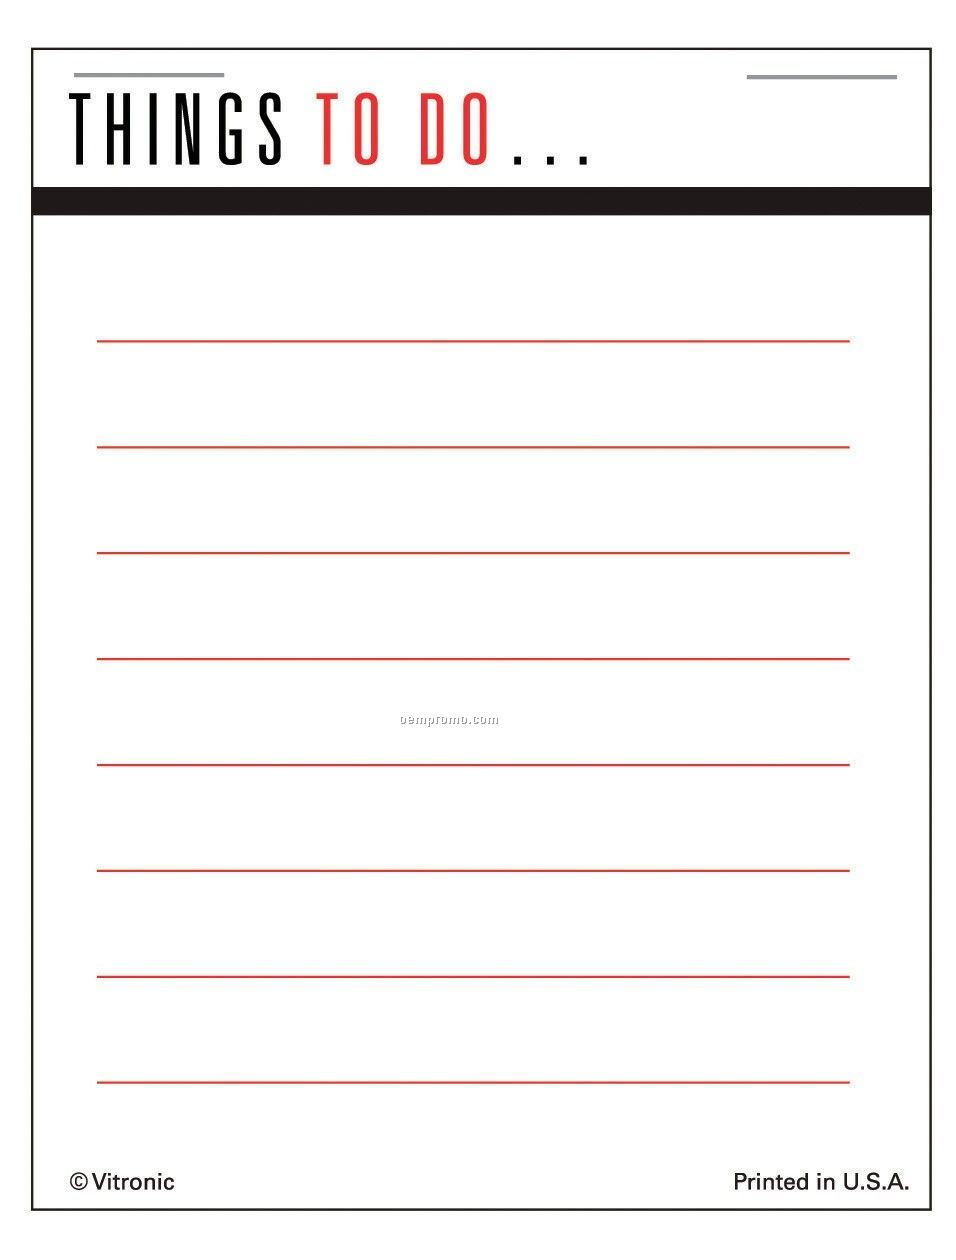 Super Size Things To Do List Press-n-stick Calendar Pads (After 8/01/11)